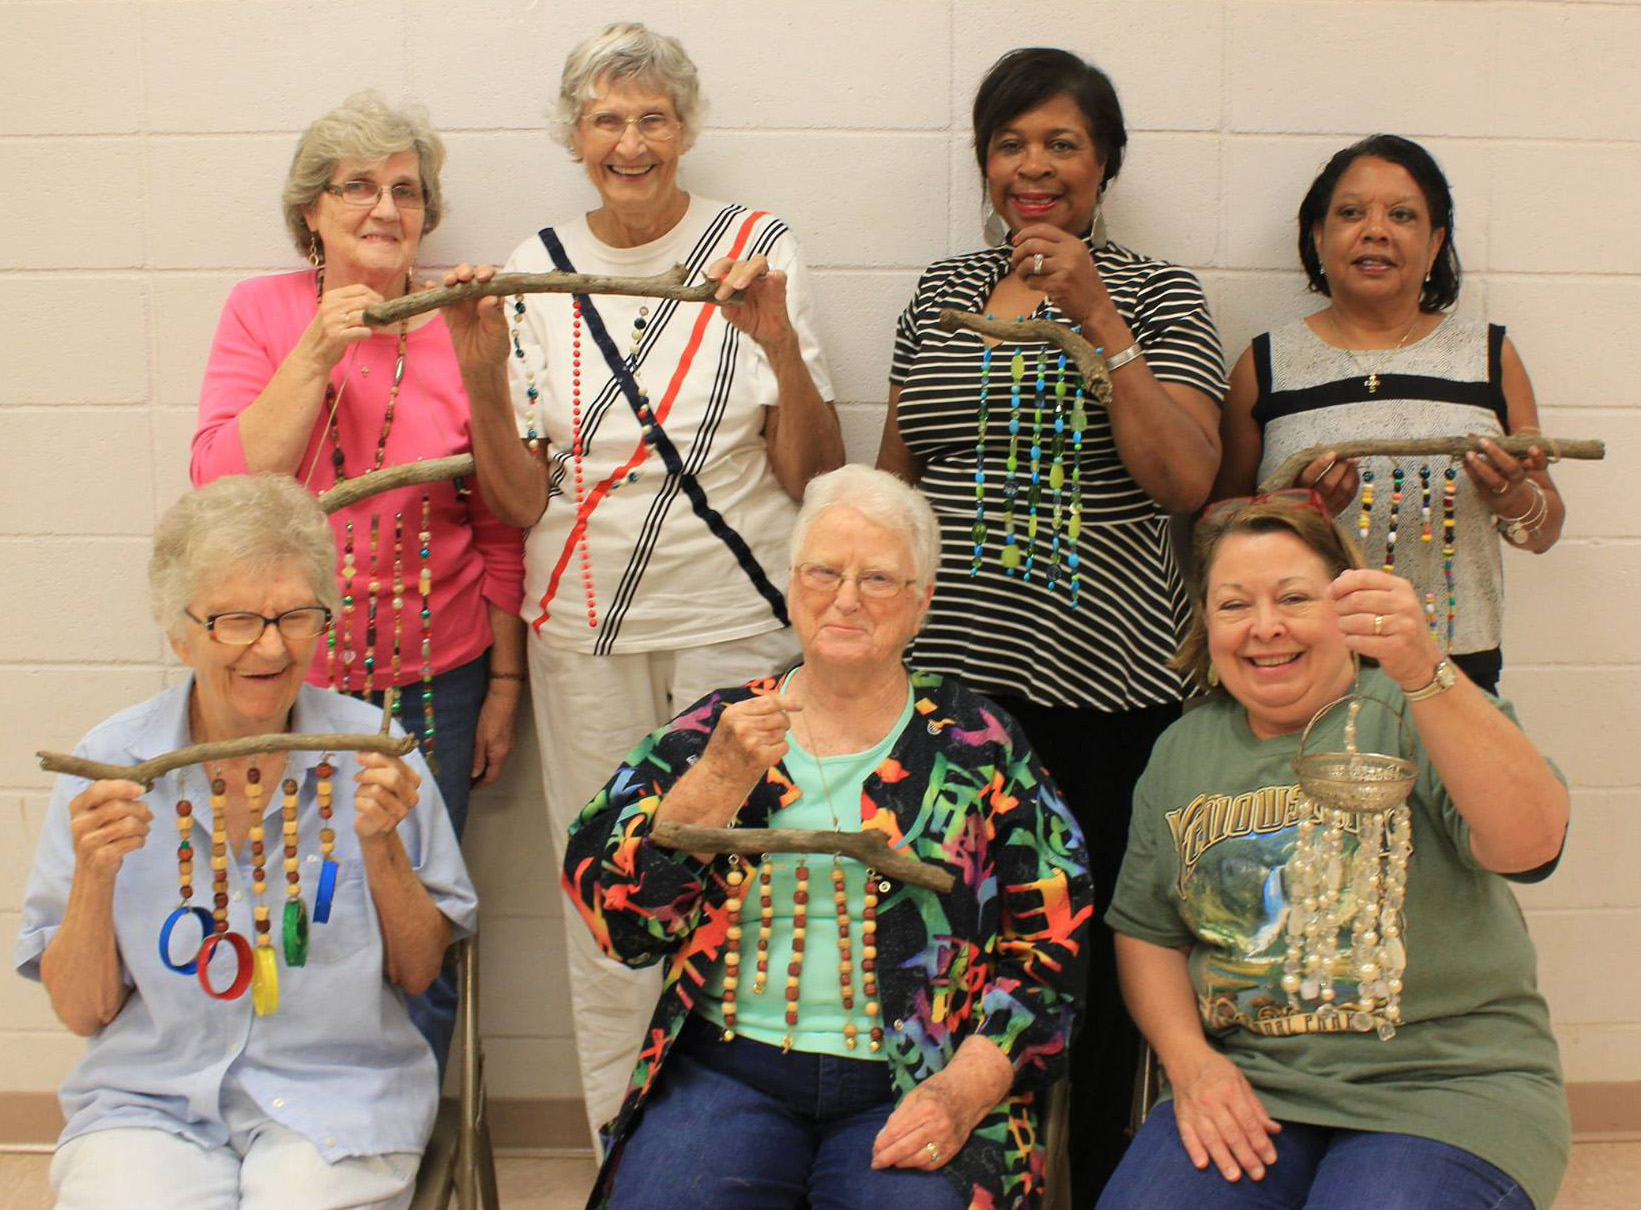  Seven women smile as they hold beaded windchimes.